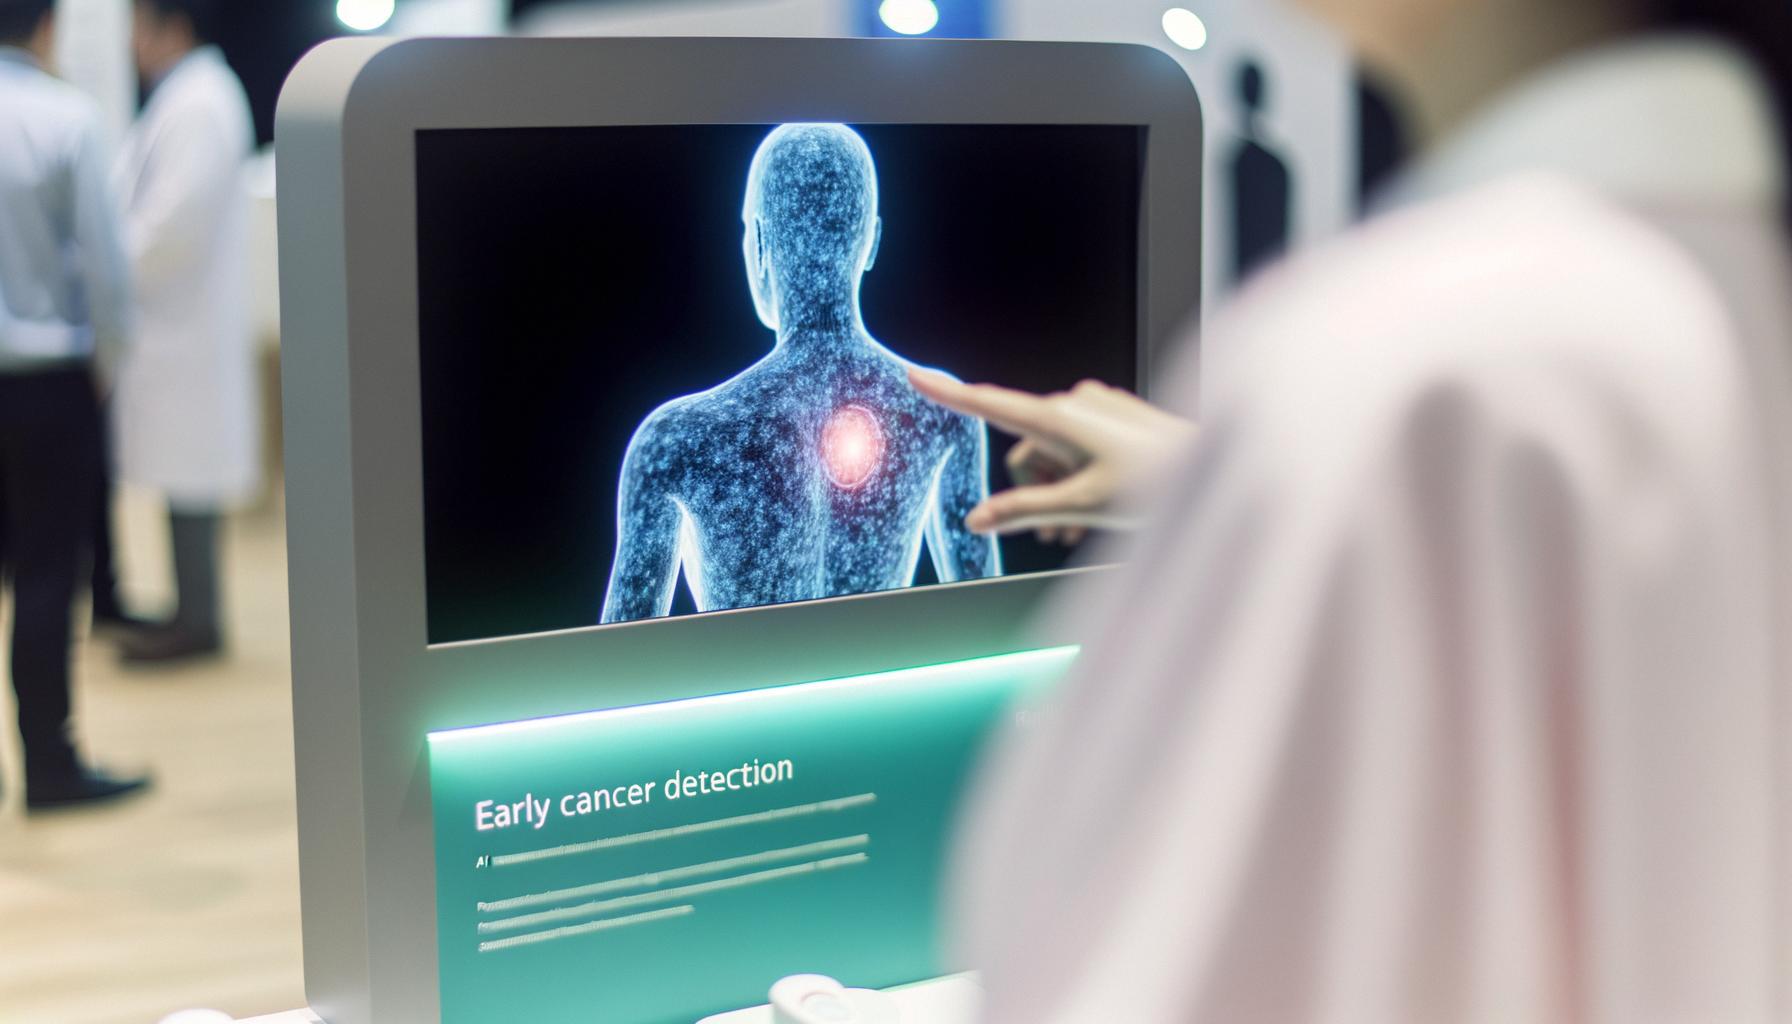 AI improvements enhance early cancer detection and personalize treatments